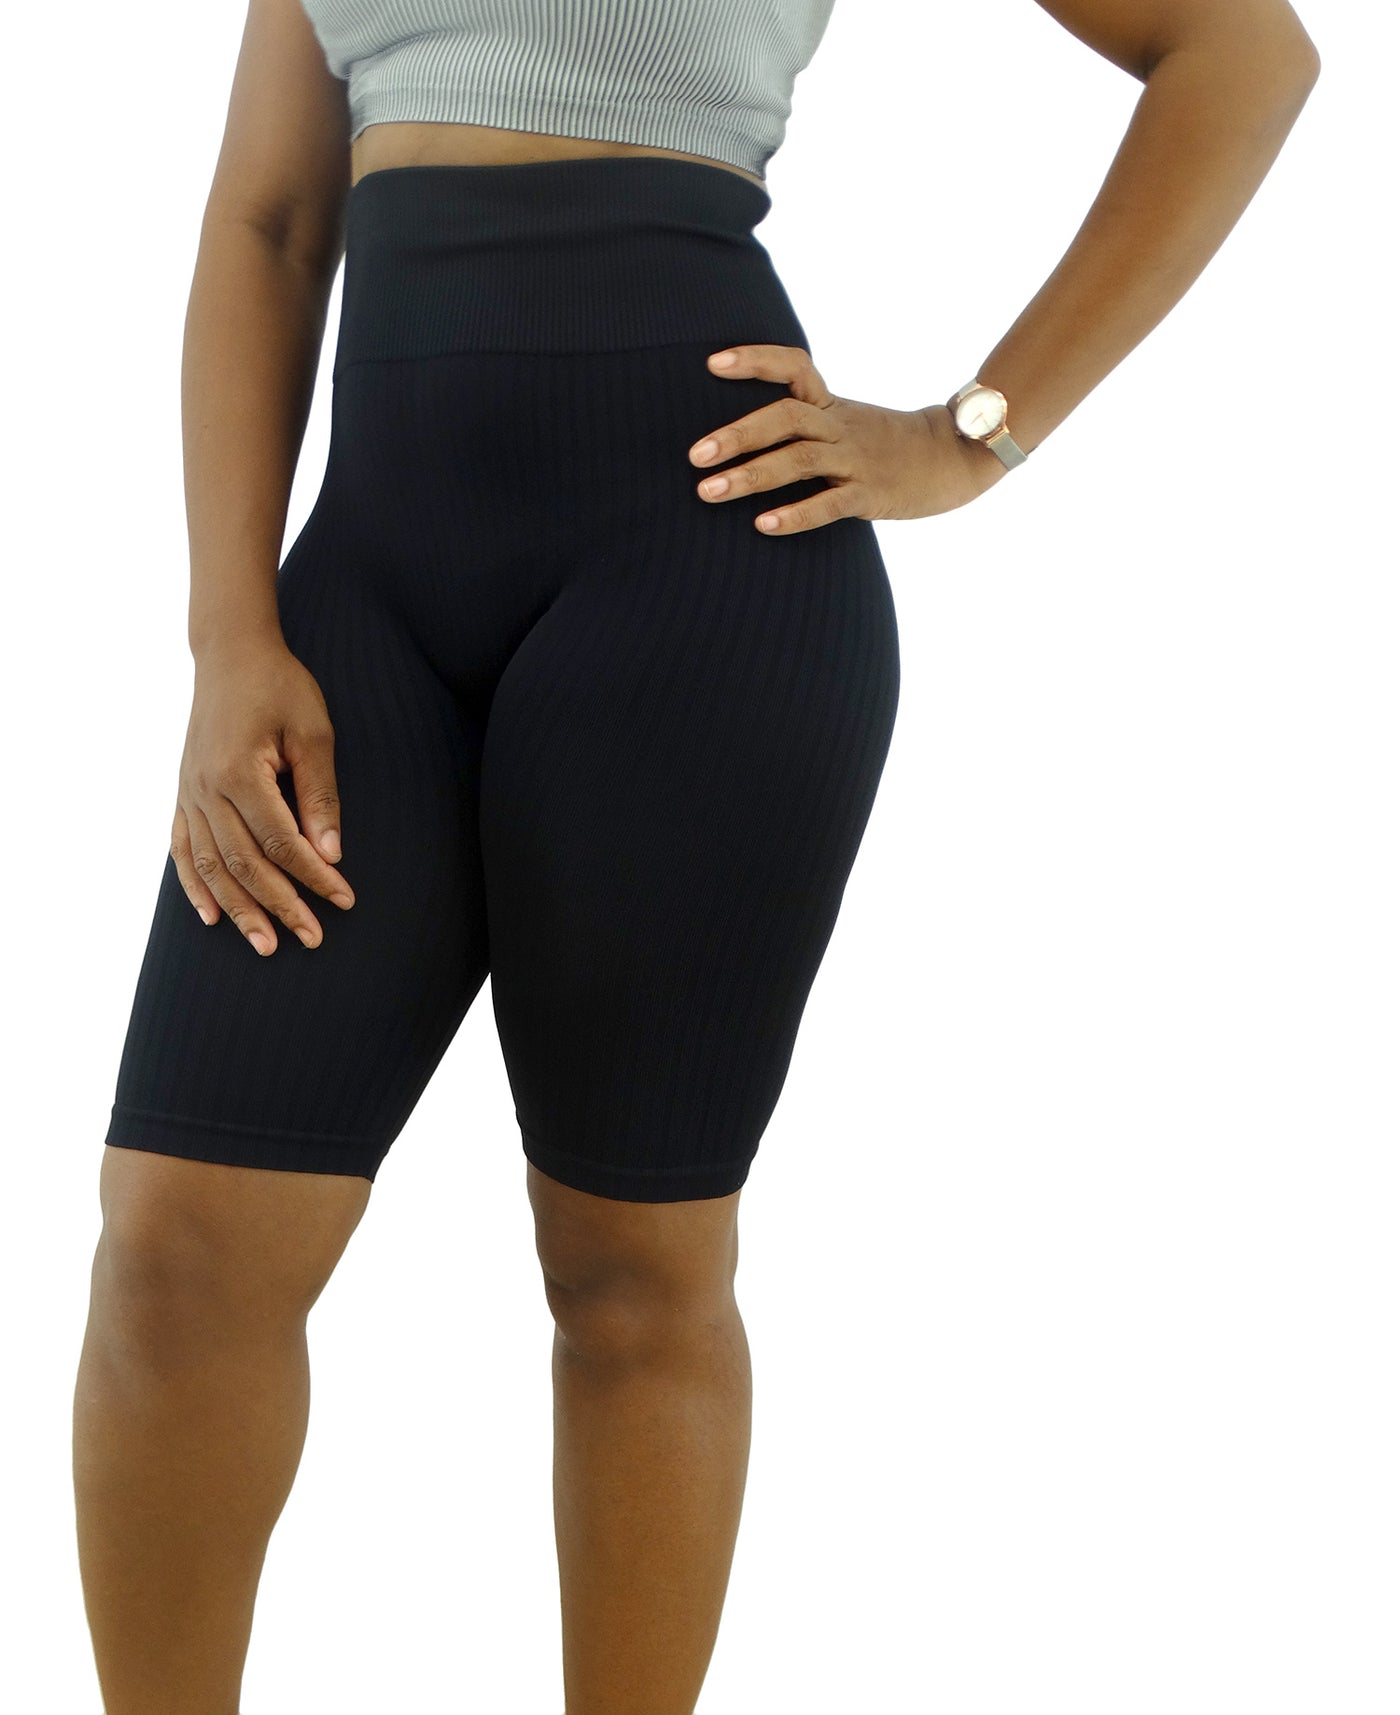 Short Leggings with High Waist - Black - Comfortable and Stylish